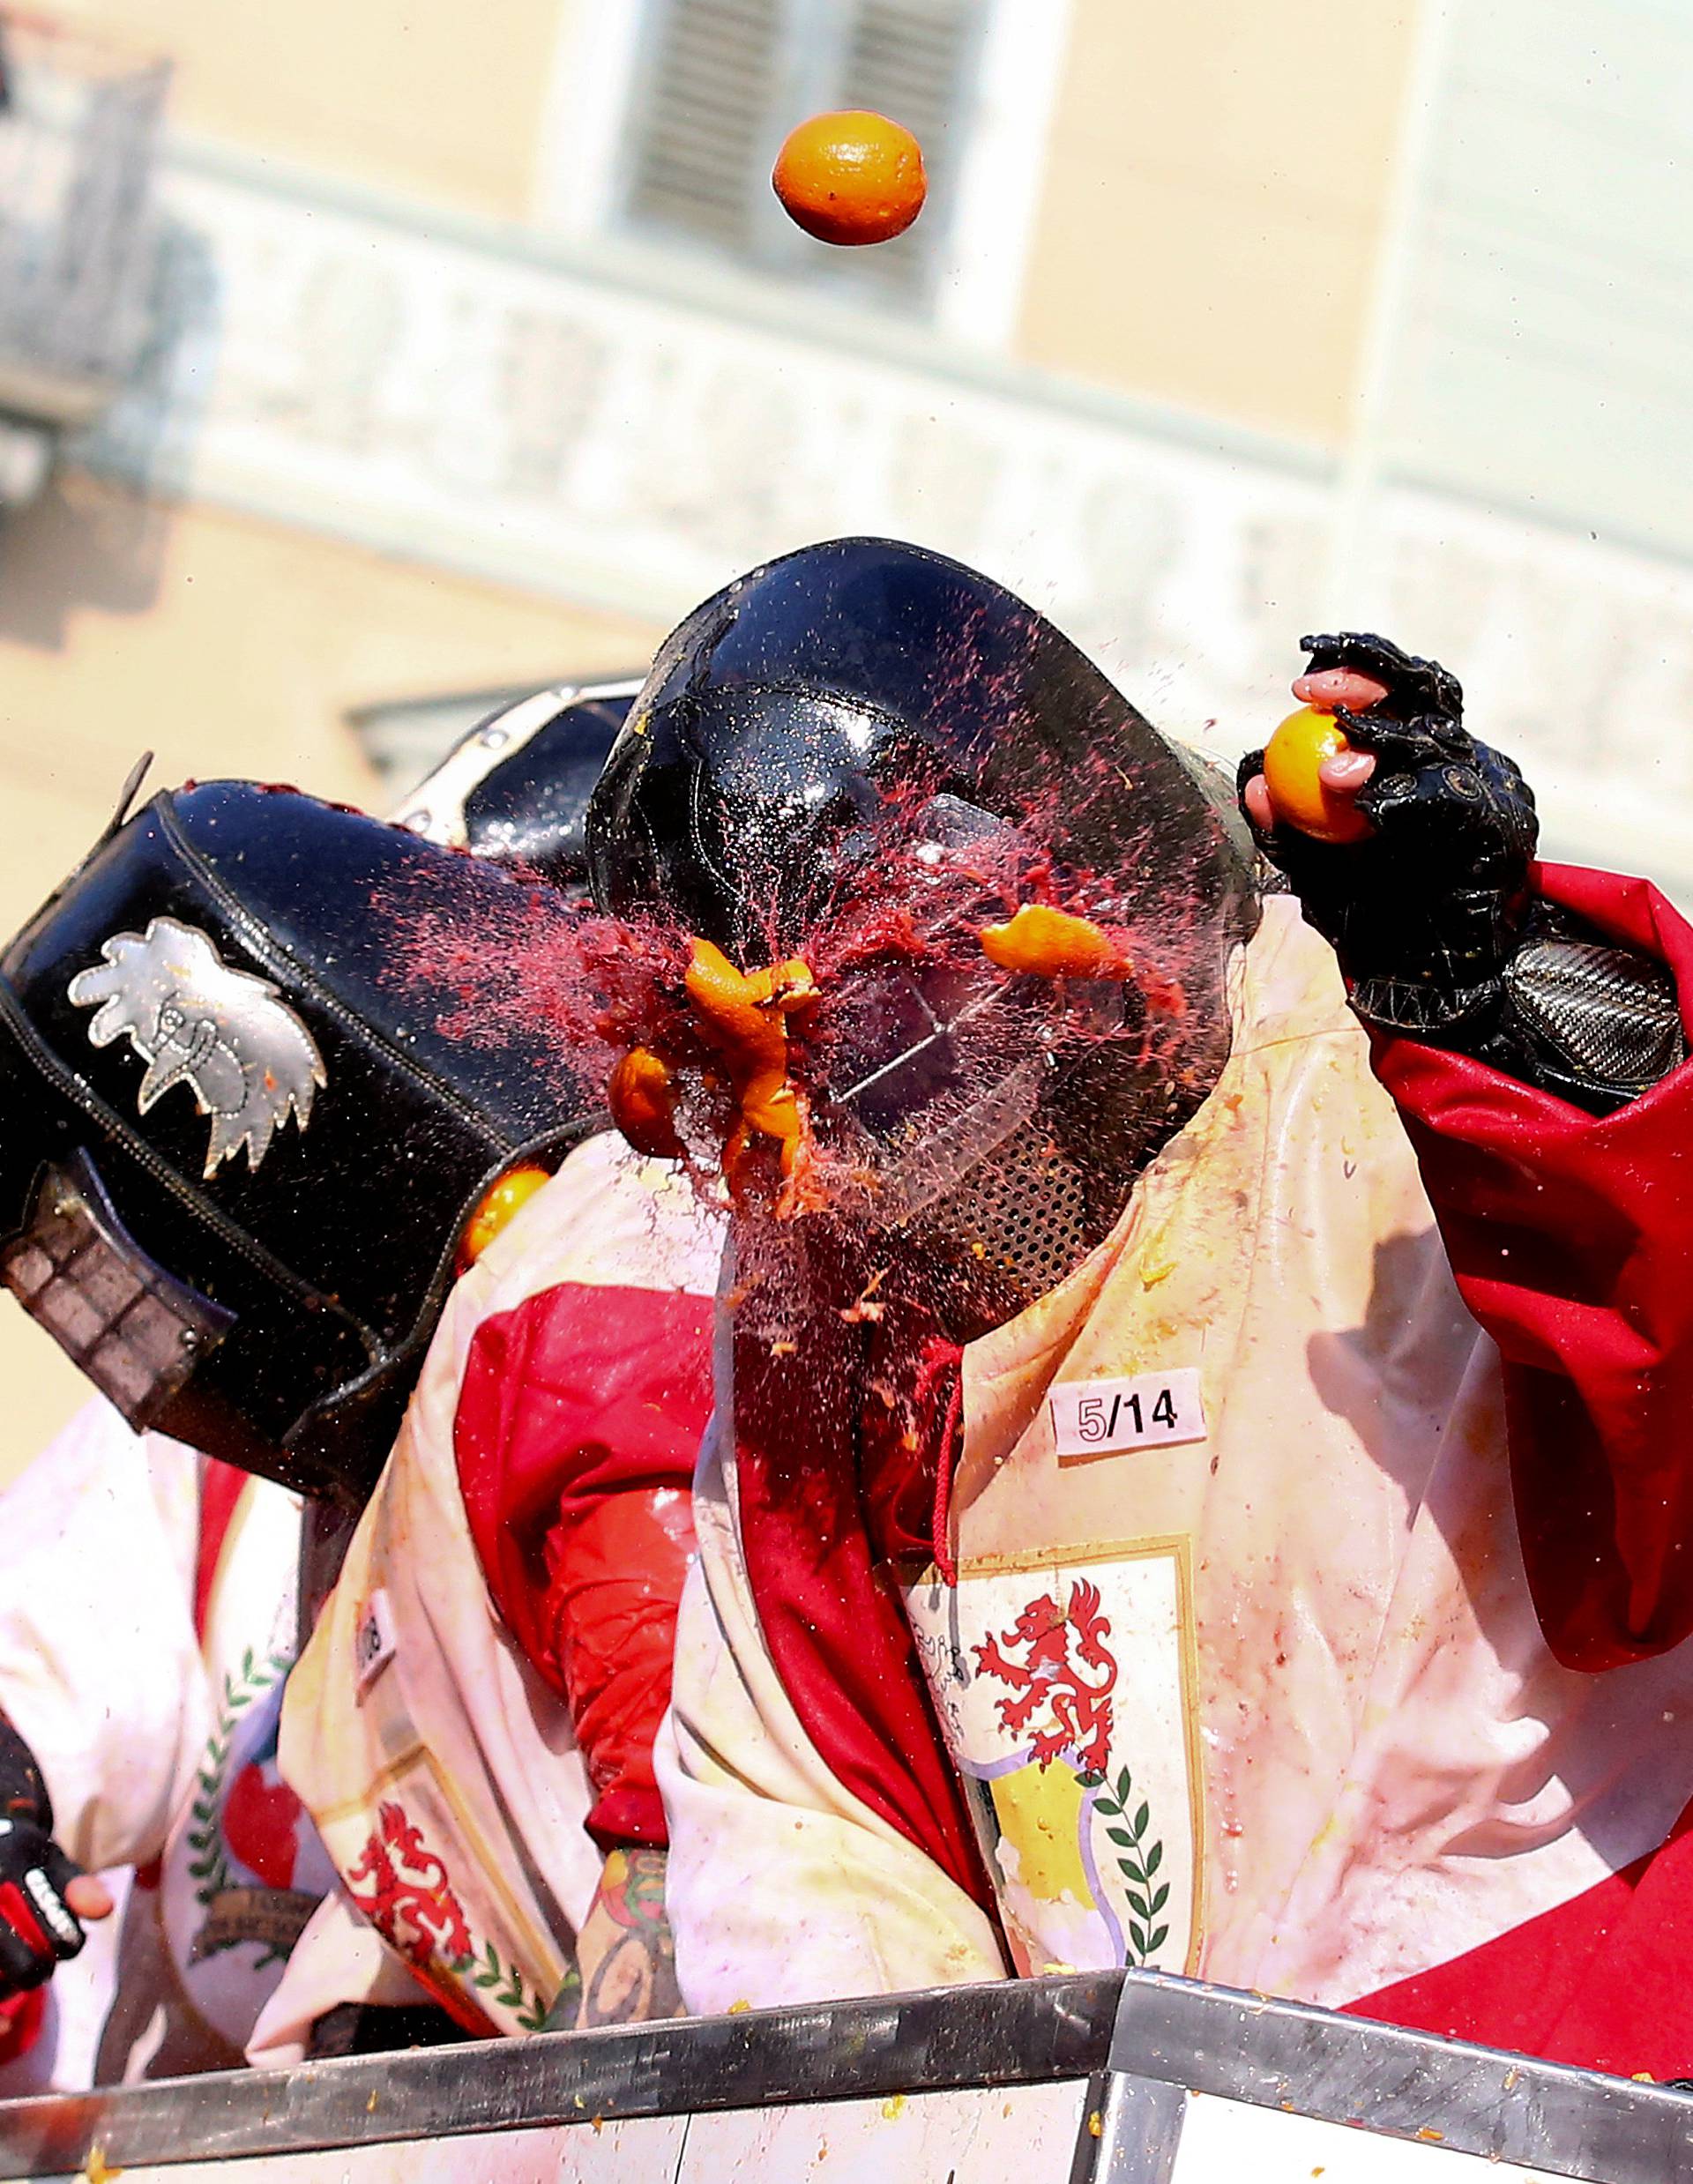 Members of rival teams fight with oranges during an annual carnival battle in the northern Italian town of Ivrea